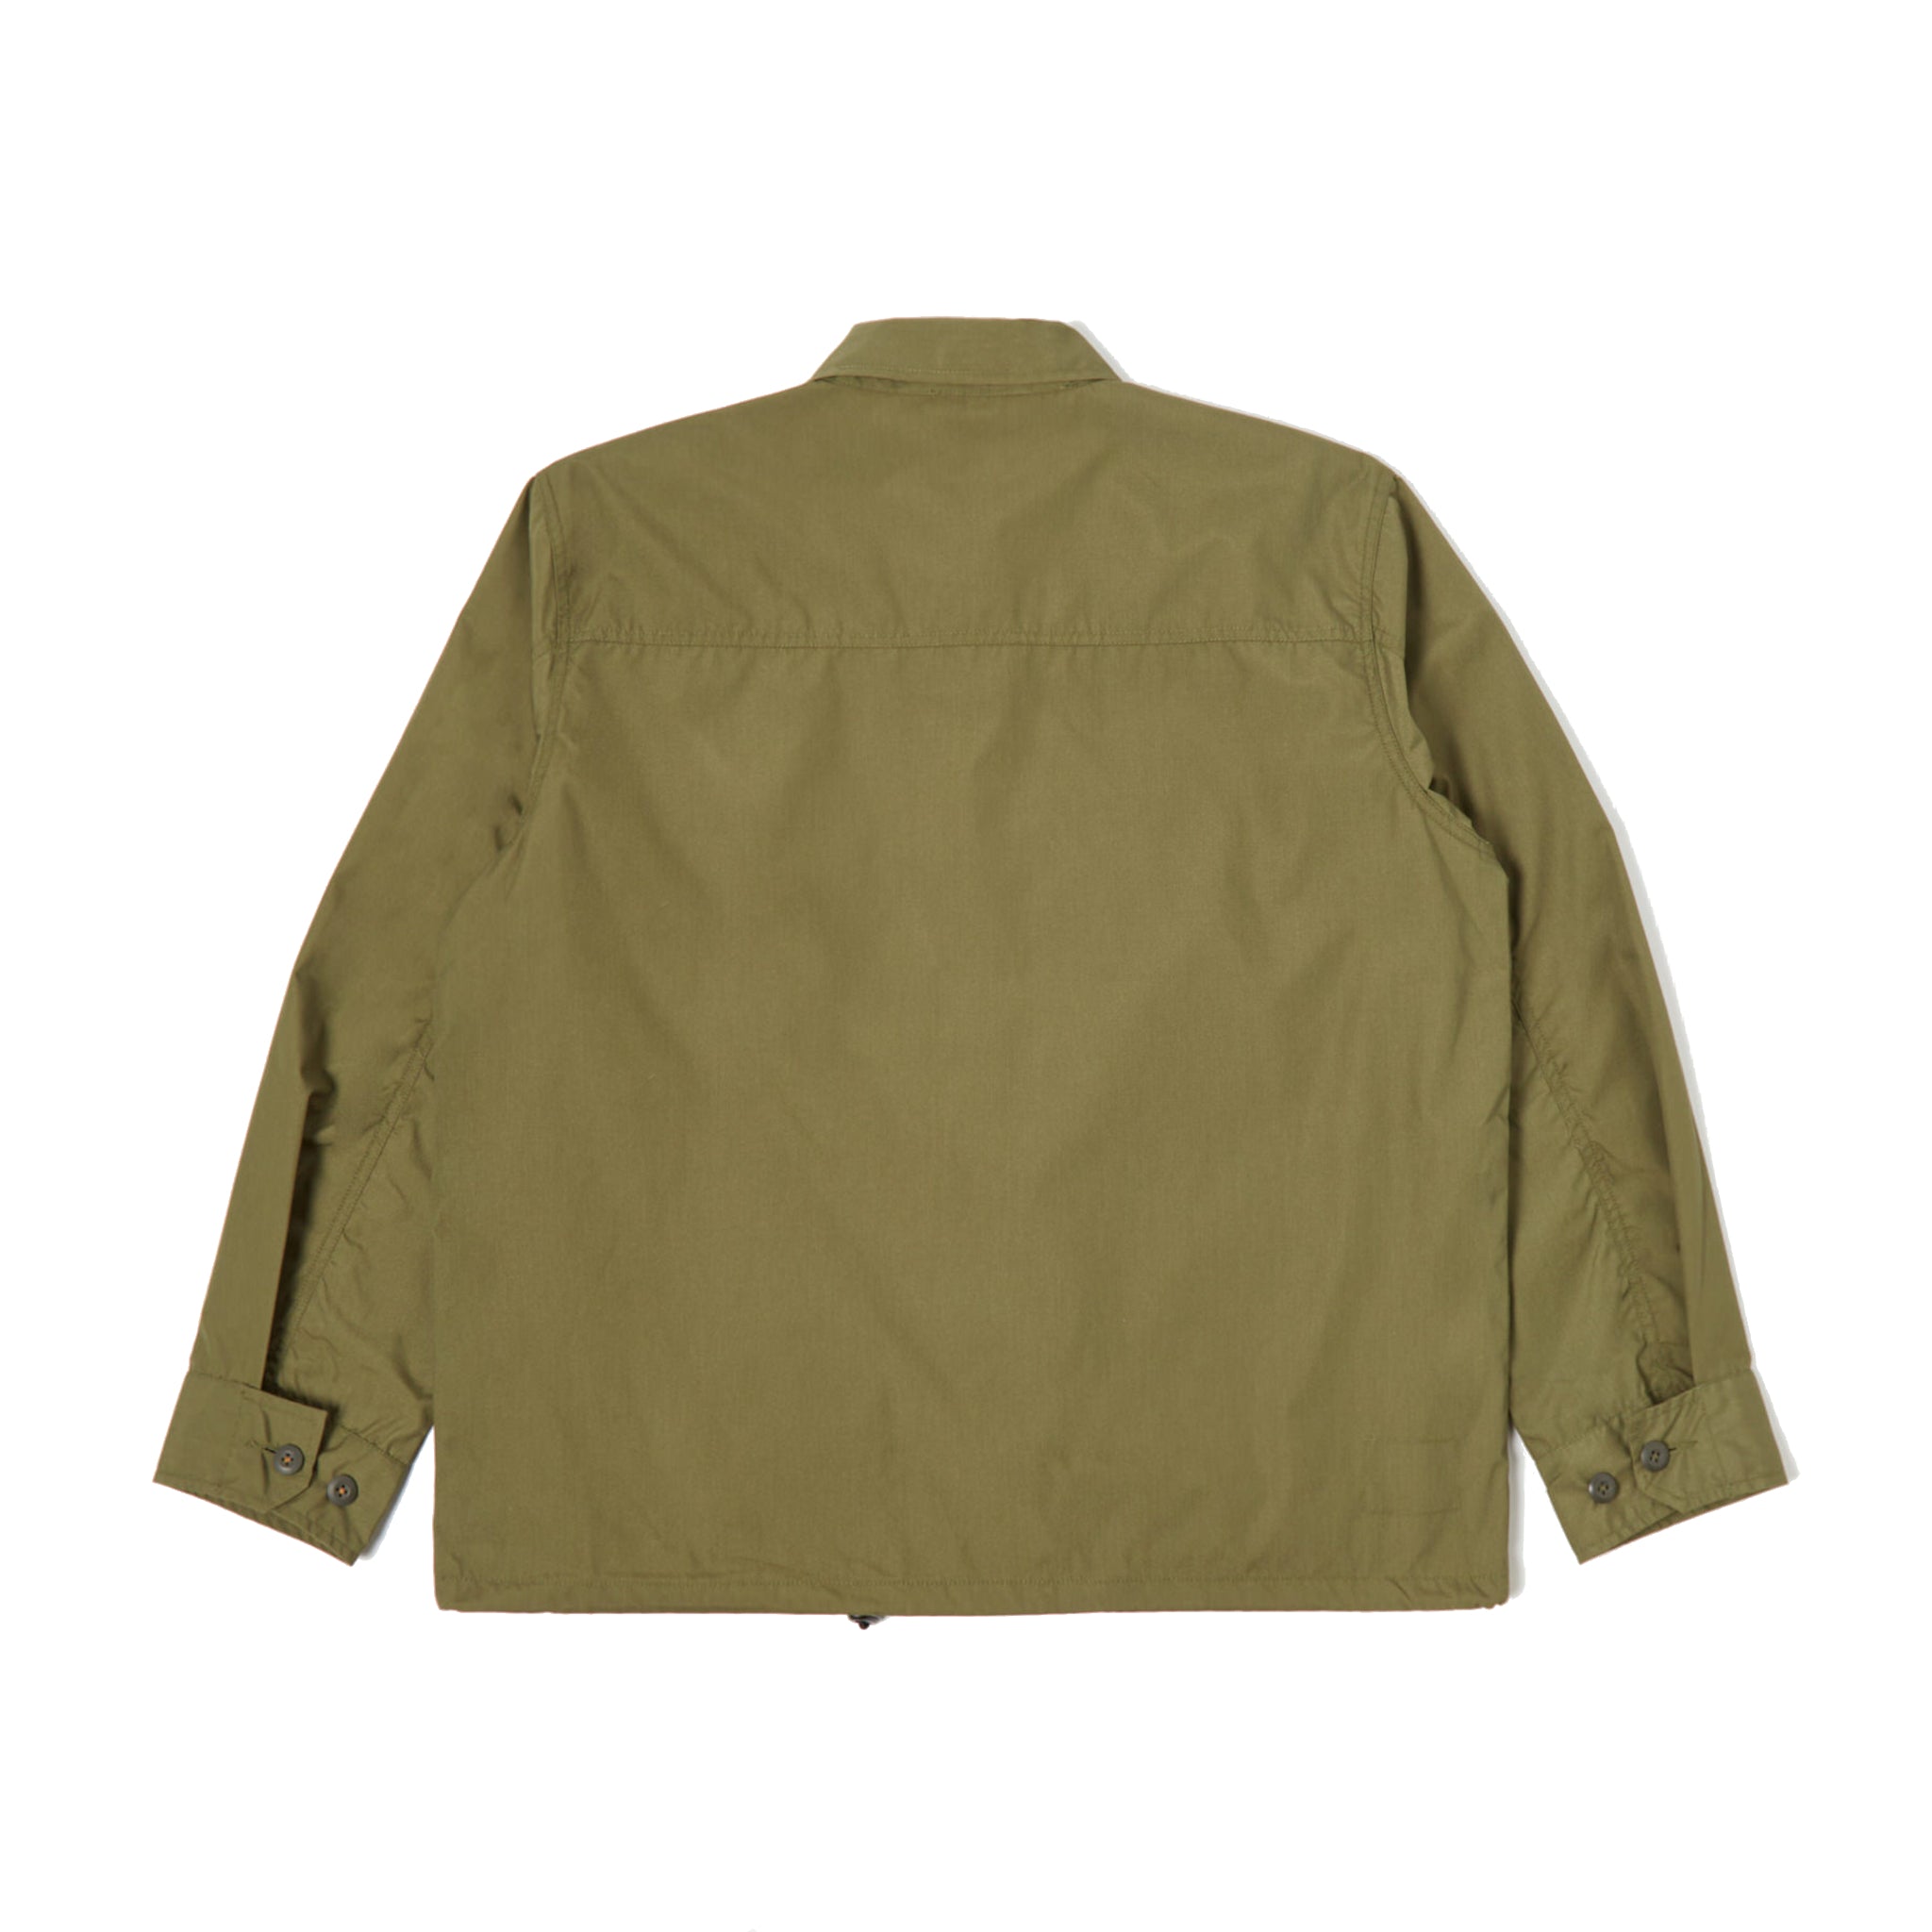 Parachute Field Jacket Recycled Poly Tech - Olive-Universal Works-W2 Store